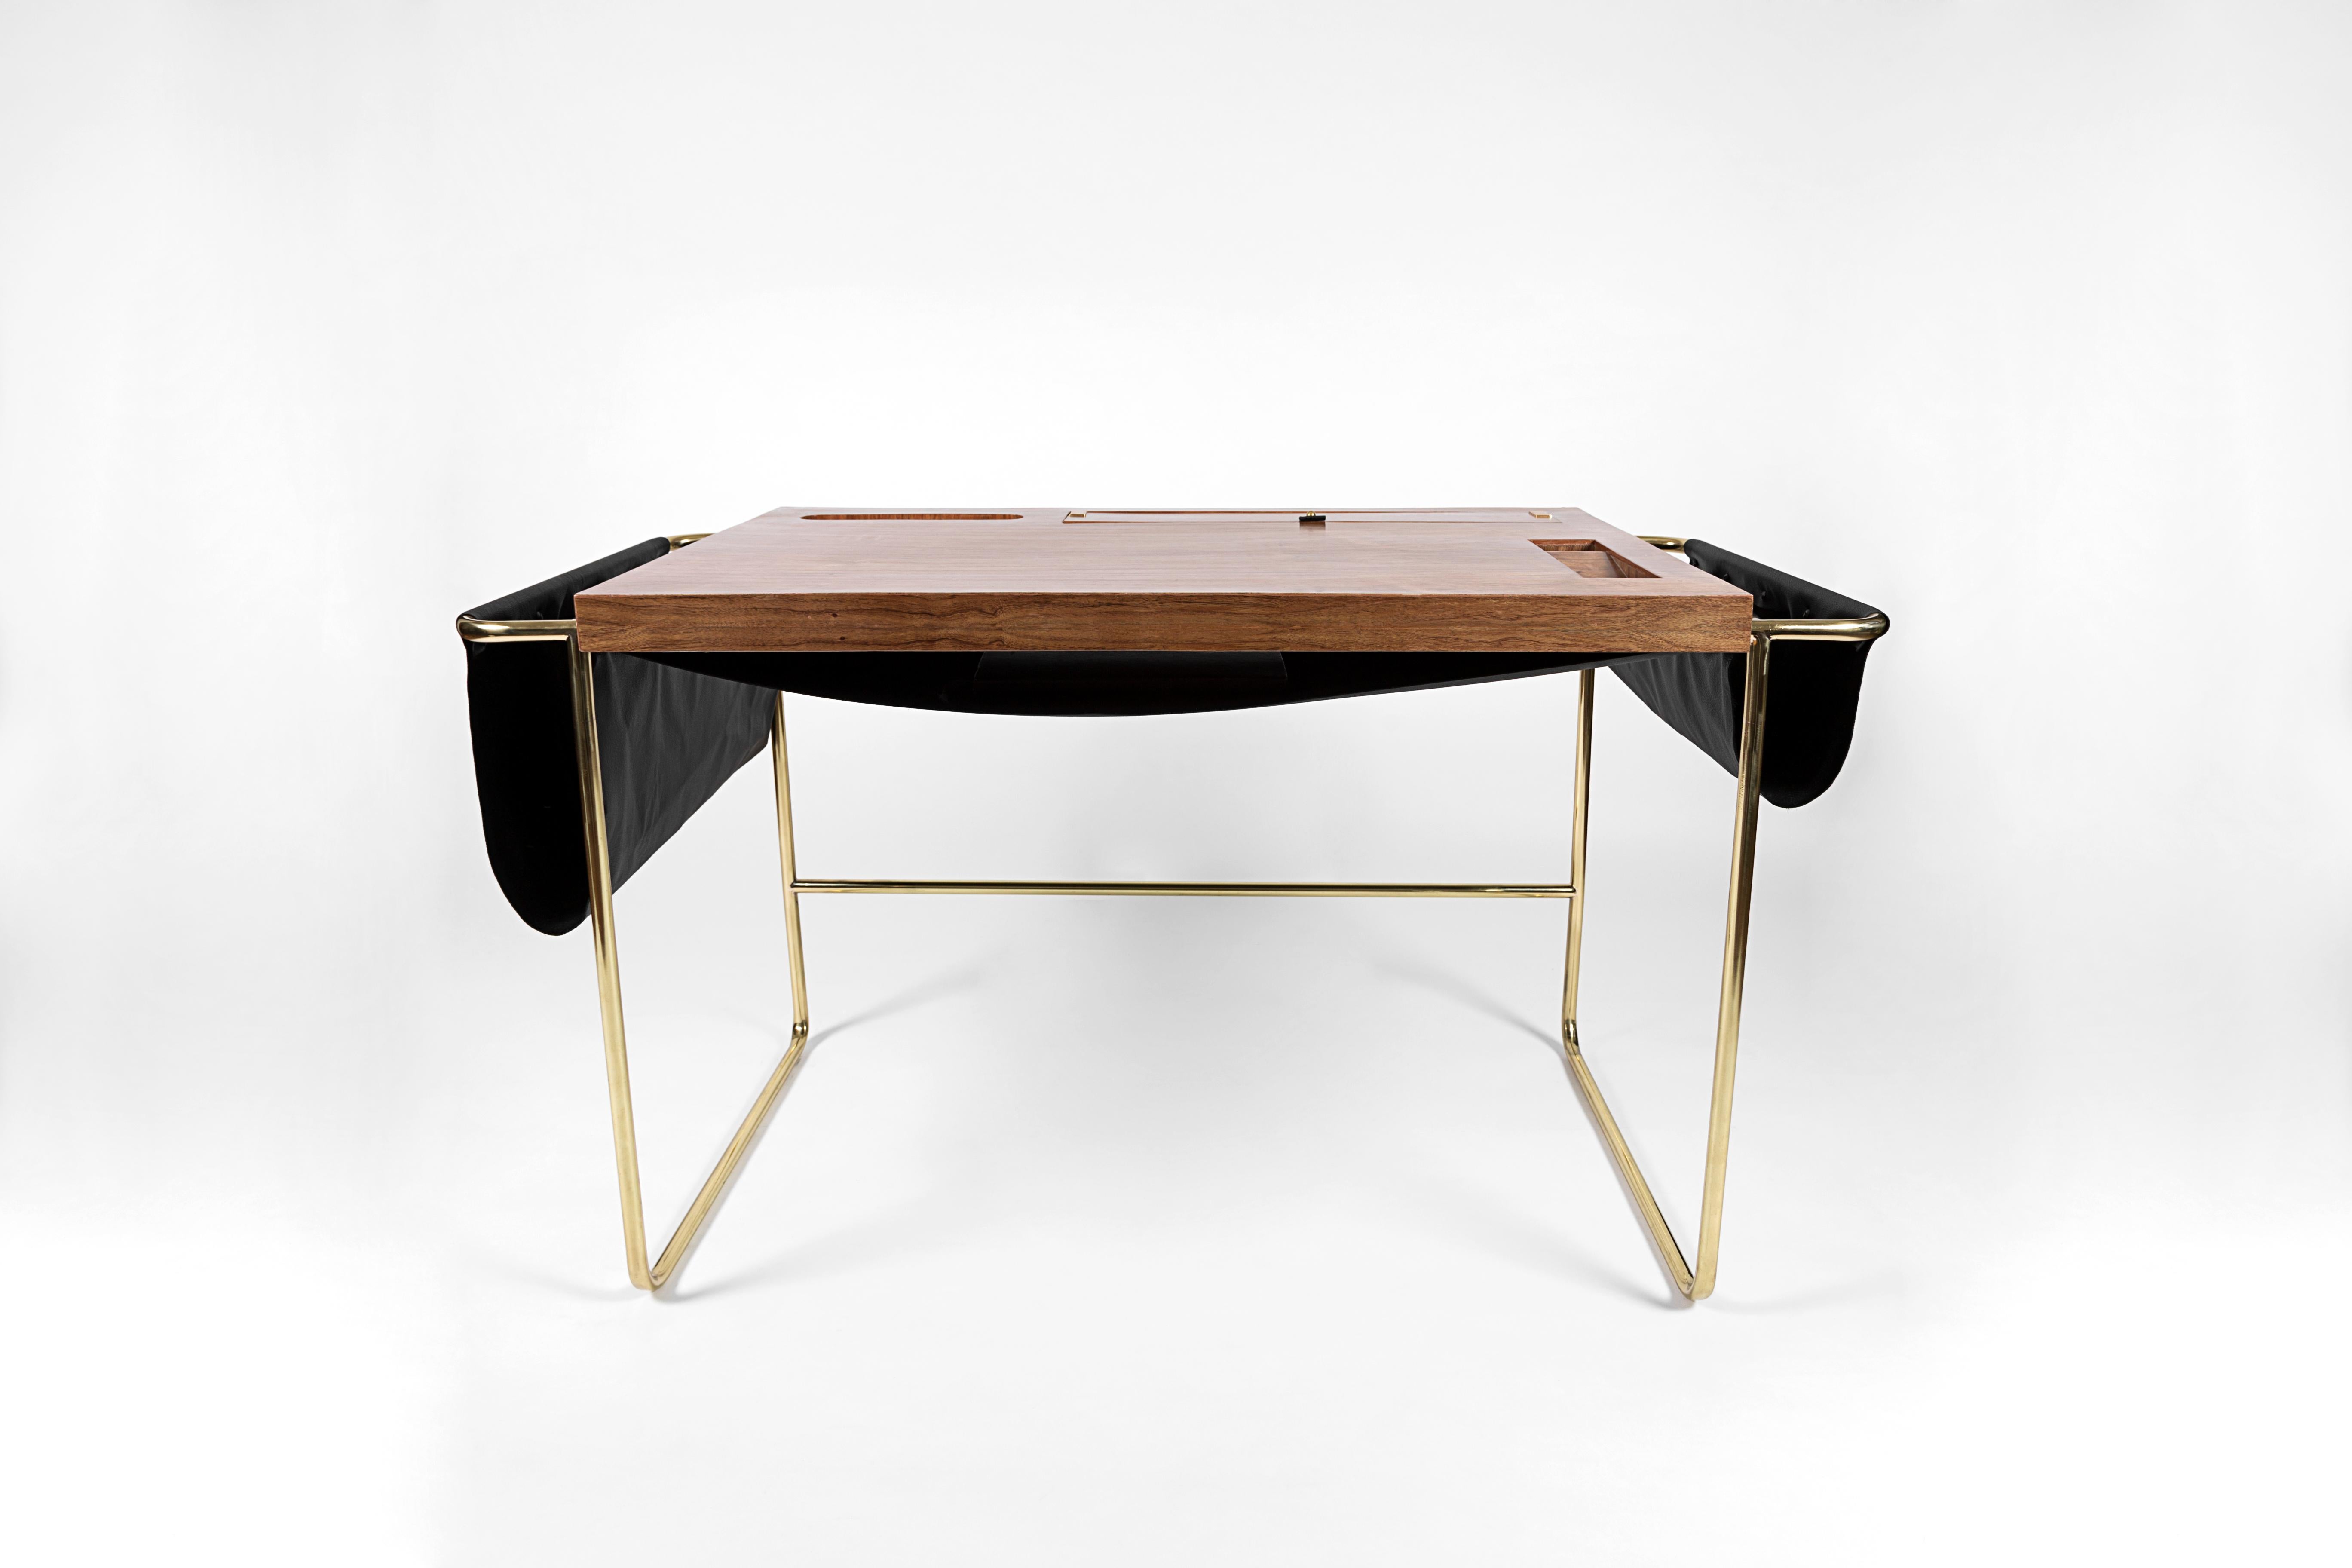 Casablanca desk by Nomade Atelier
Dimensions: D 130 x W 60 x H 73 cm
Material: Brass, walnut, leather.
Available in black leather. For others finishes,

A striking balance between sharp edges and soft leather pocketing is found in the